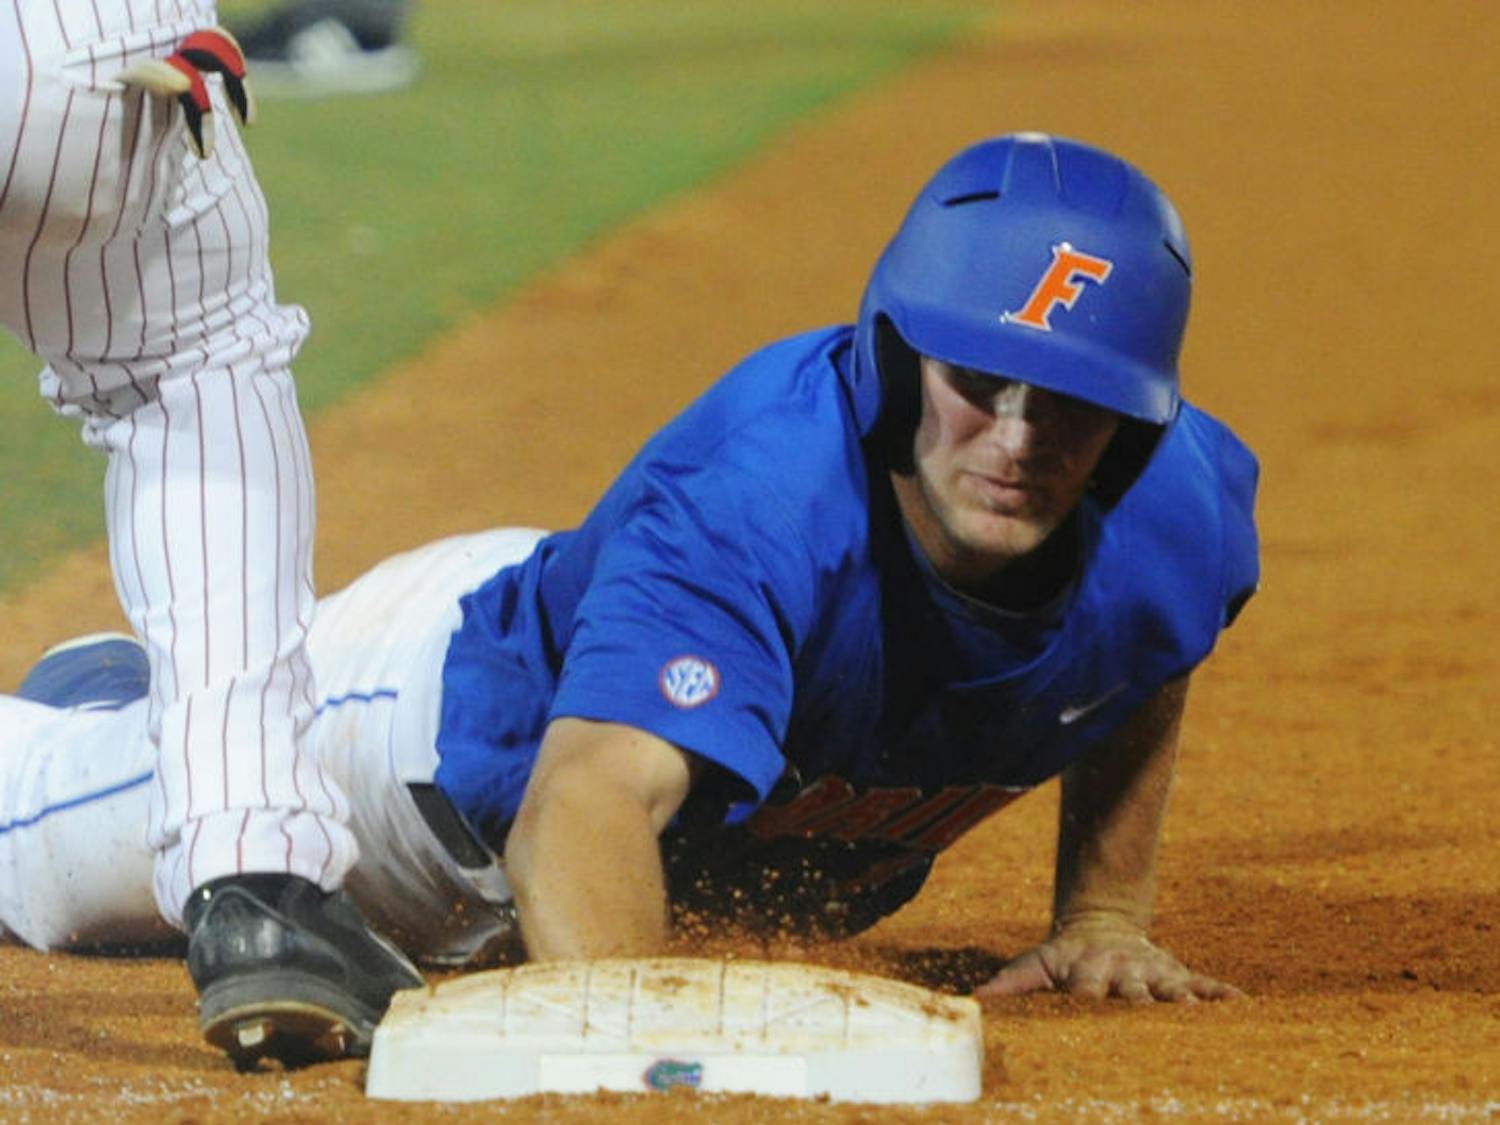 Braden Mattson dives toward first base during Florida’s 1-0 win against Arkansas on March 15 at McKethan Stadium. Mattson recorded one RBI and one run during UF’s 4-2 loss to Kentucky on Wednesday.